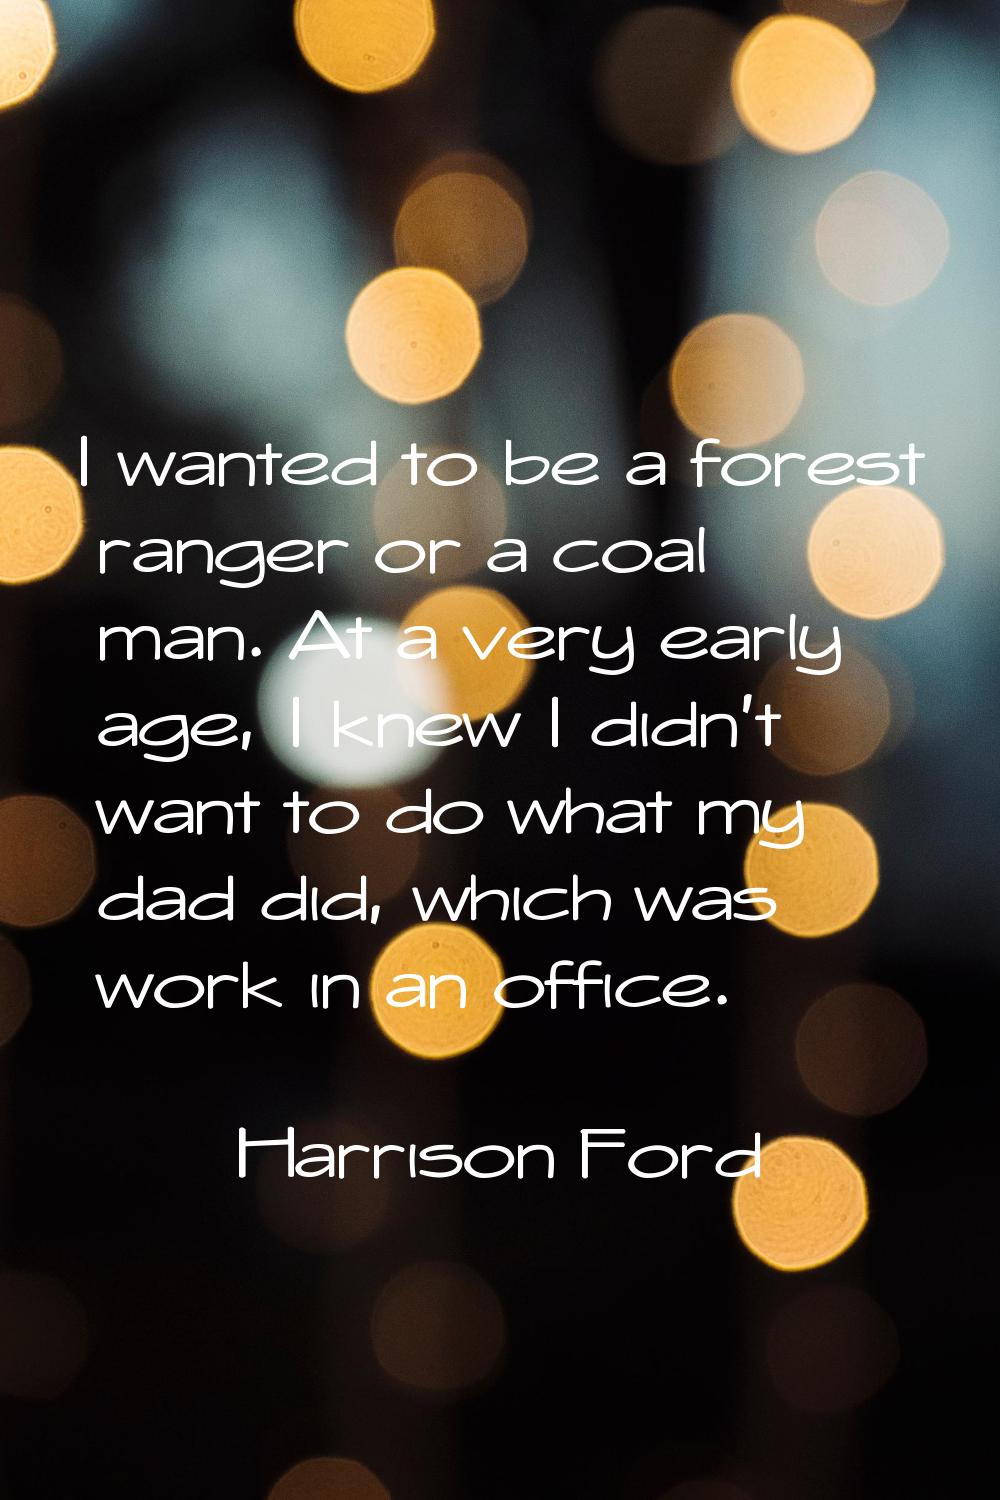 I wanted to be a forest ranger or a coal man. At a very early age, I knew I didn't want to do what 